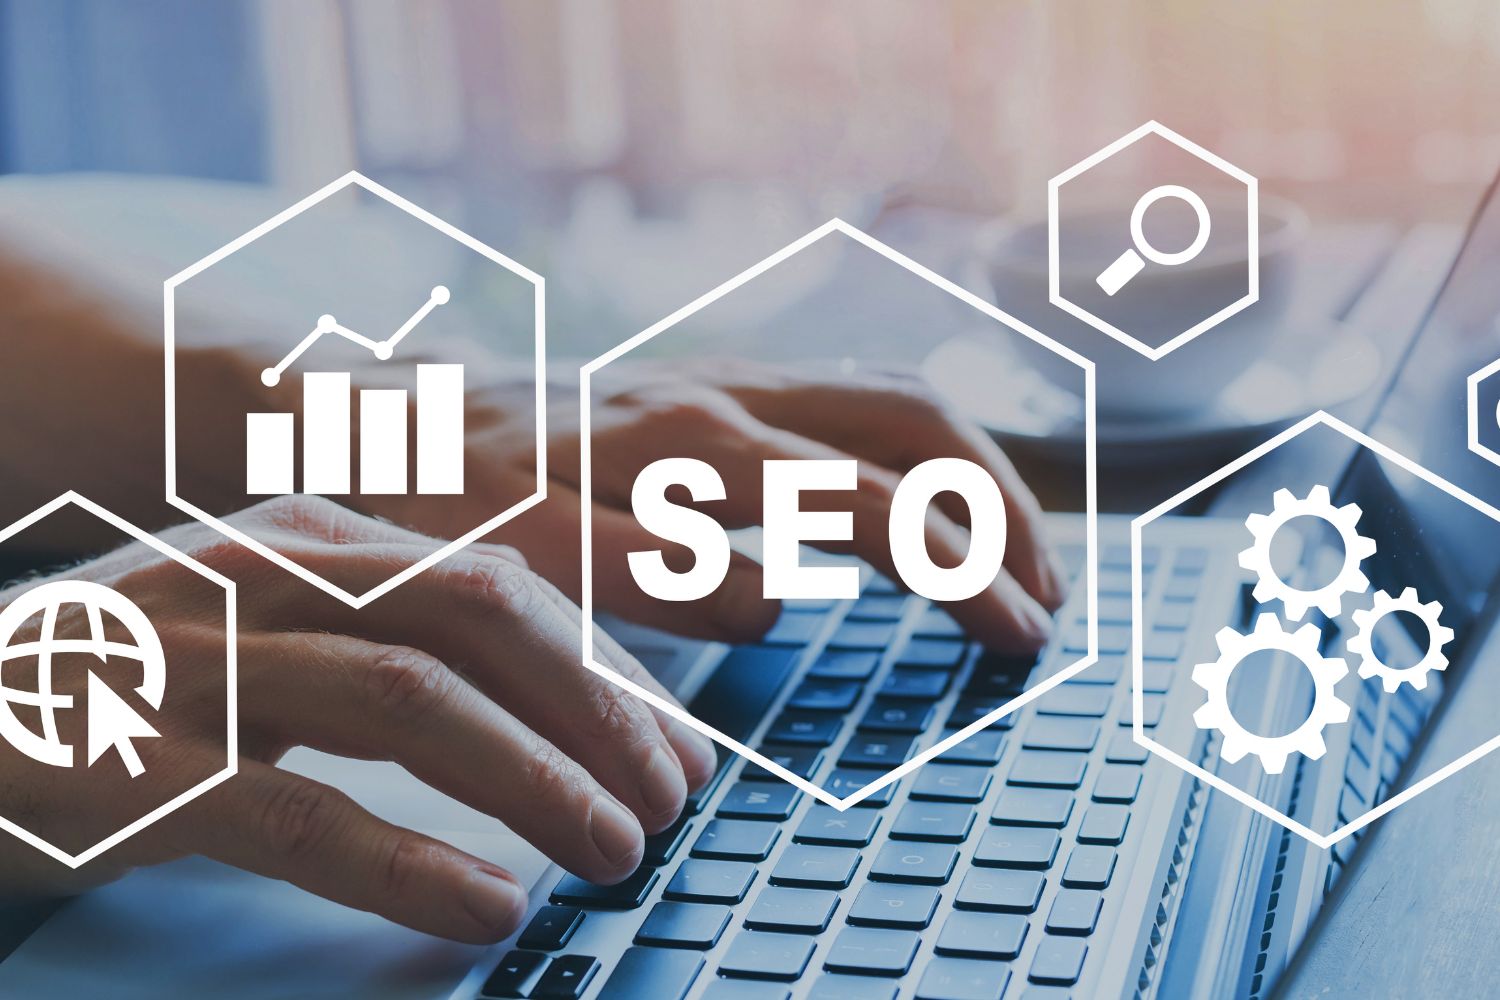 What are the benefits of organic SEO?